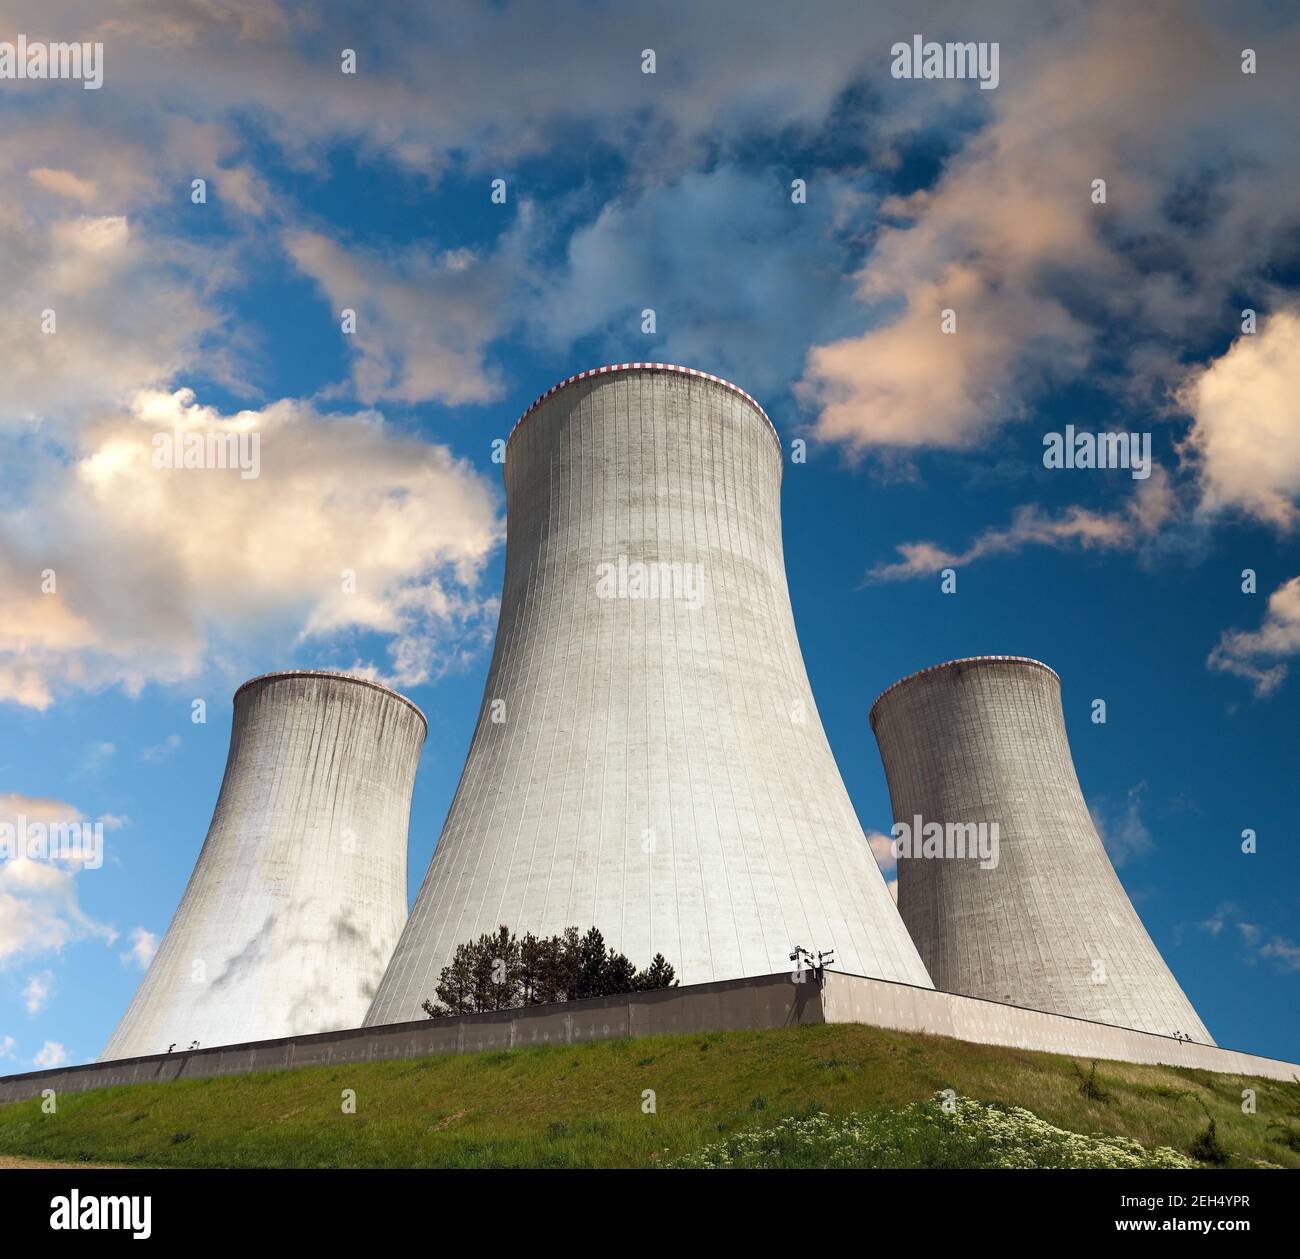 Evening colored sunset view of cooling tower - Nuclear power plant Dukovany - Czech Republic Stock Photo